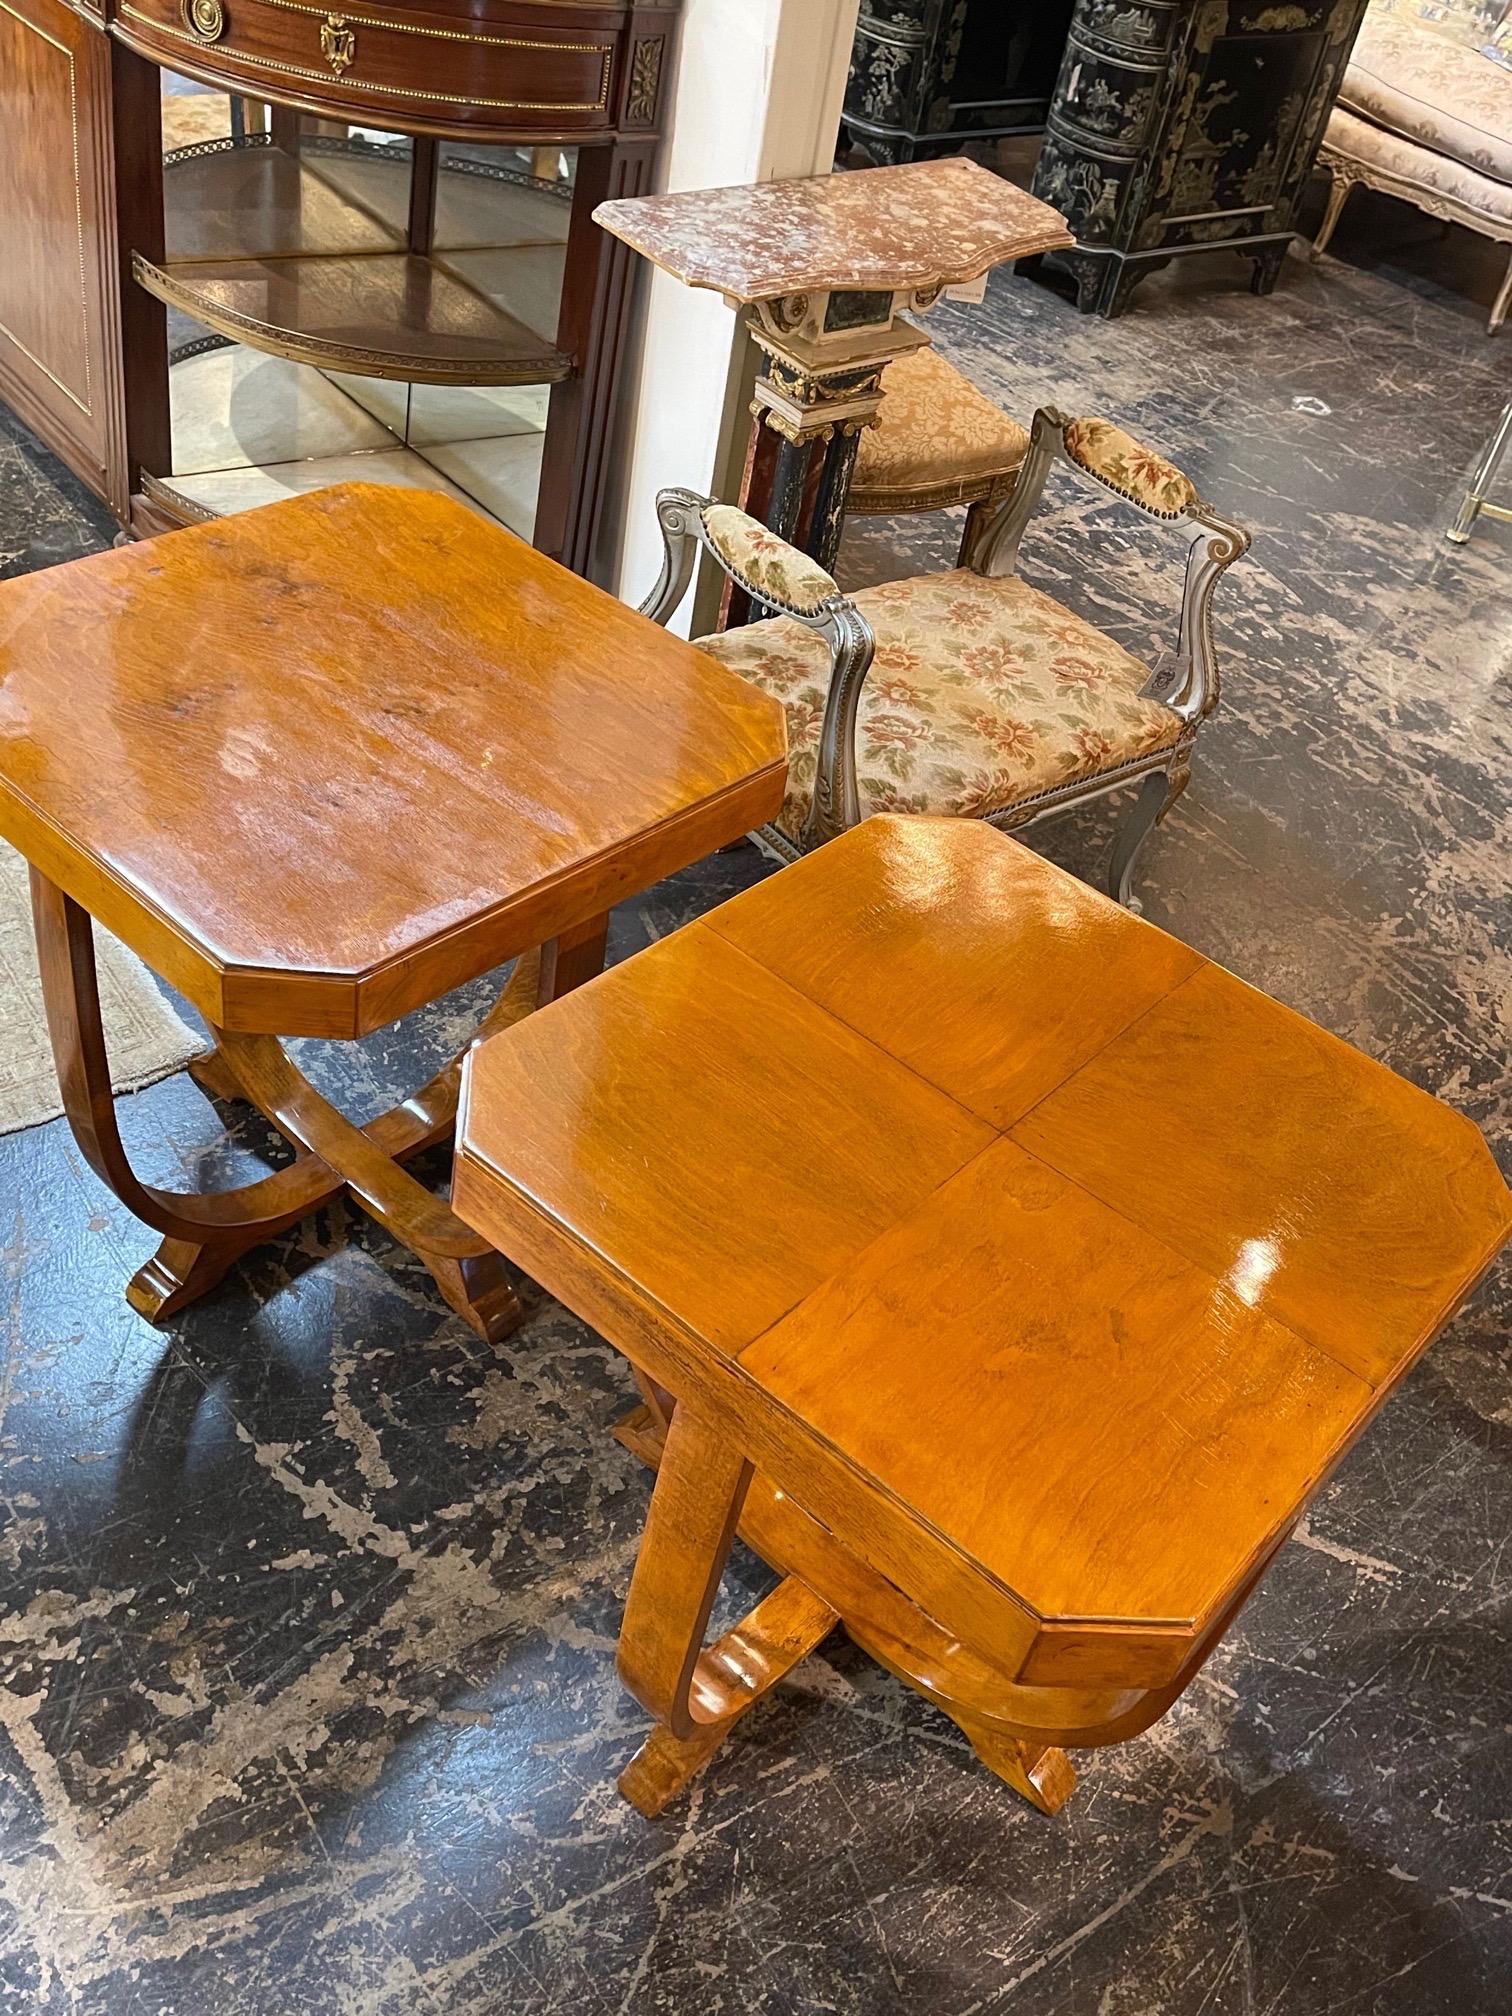 Lovely midcentury French Art Deco alderwood side tables. Great scale and shape on these as well as a gorgeous finish! Note: Price listed is per item.